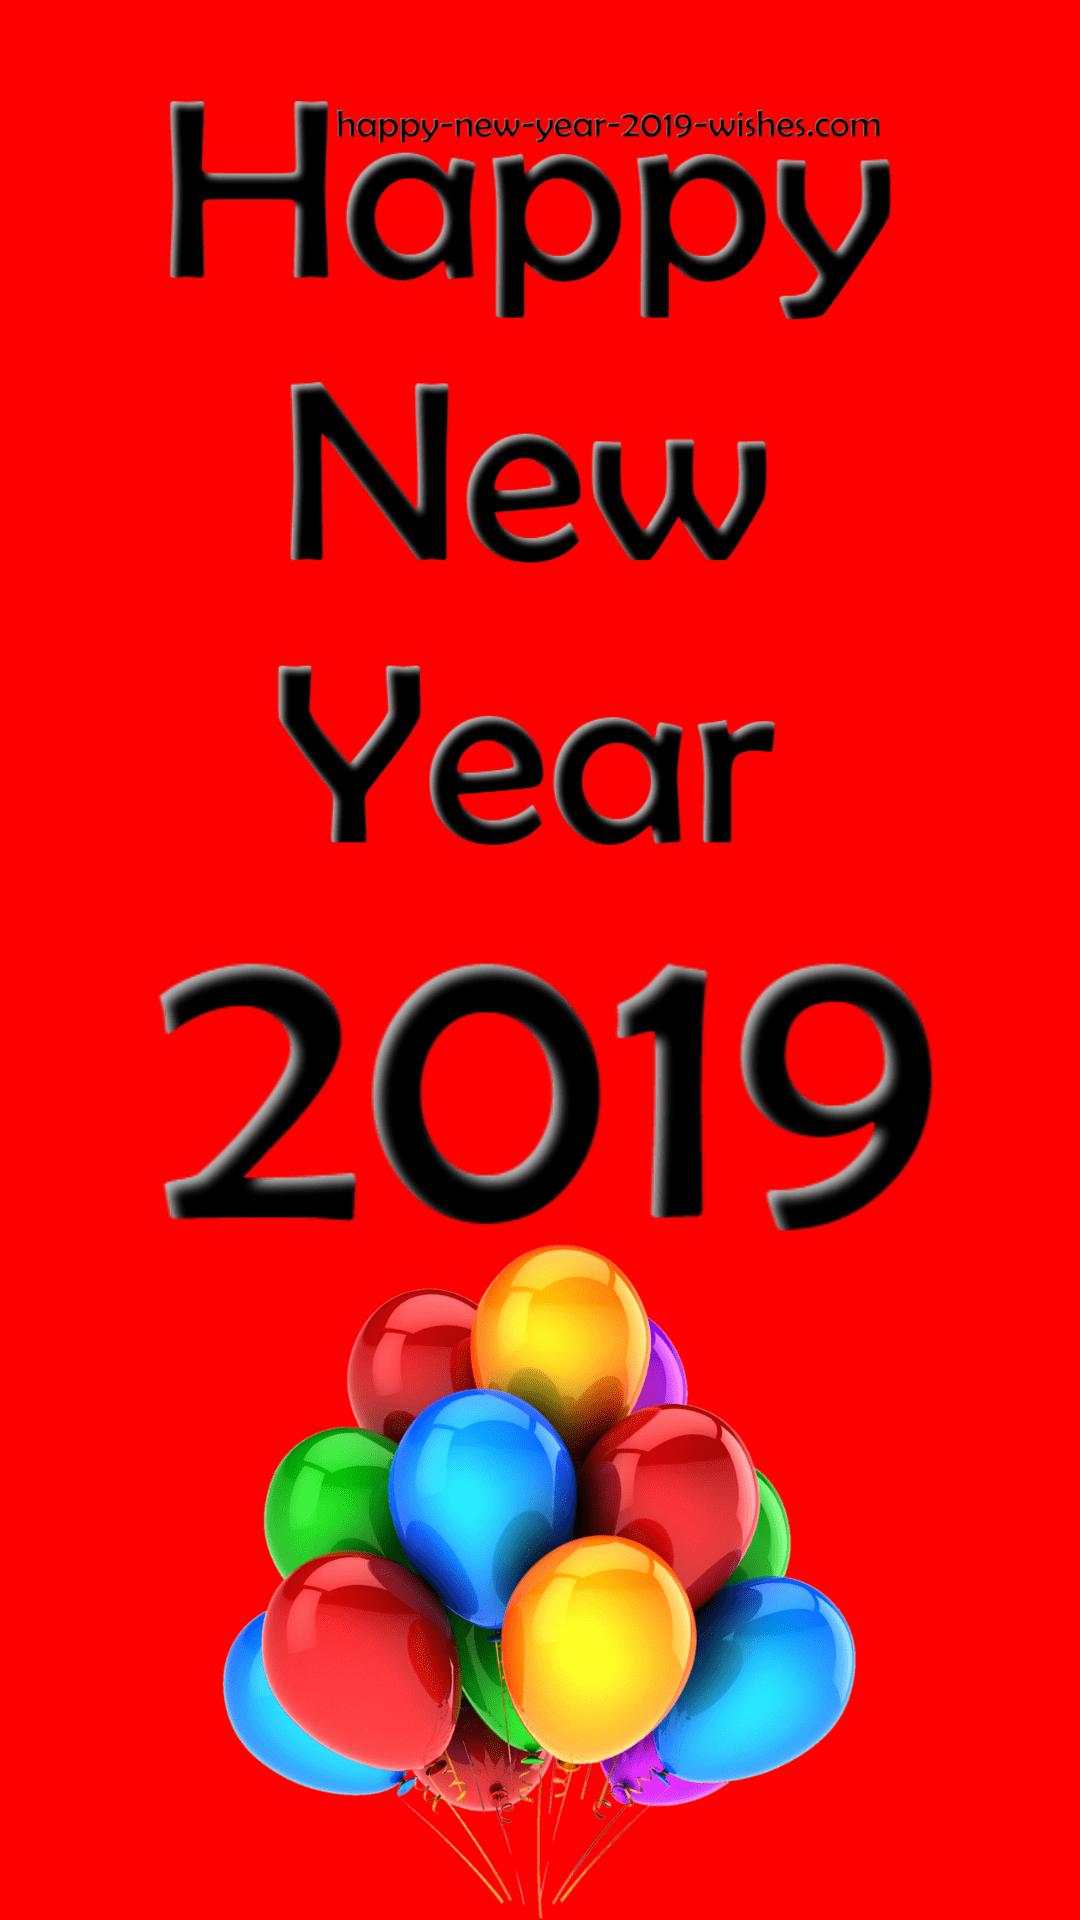 Happy New Year 2019 Mobile Wallpaper New Year 2019 Wishes